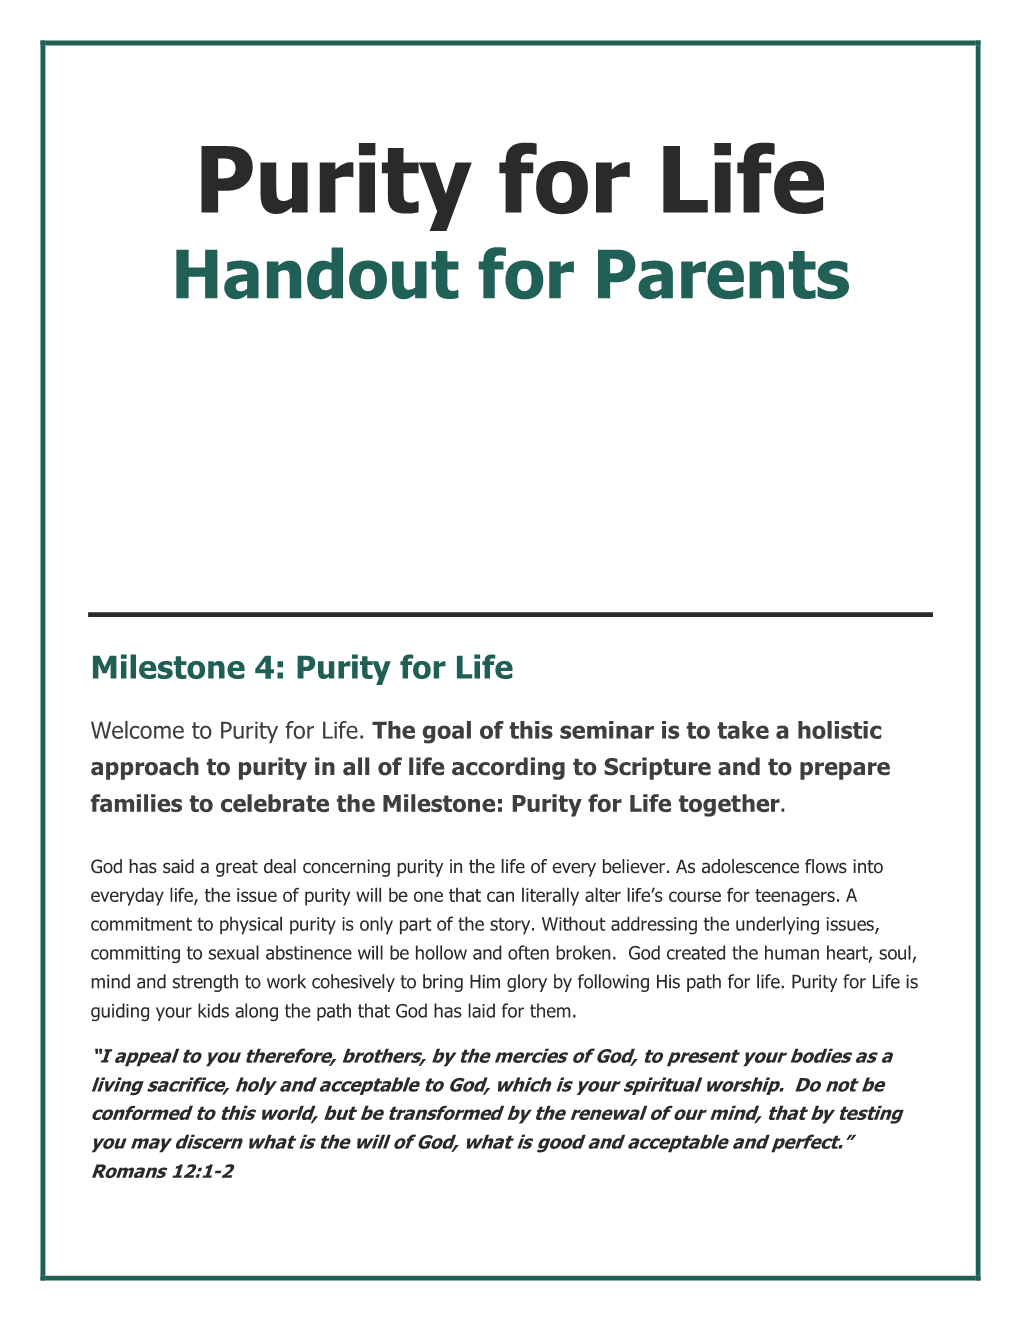 Purity for Life Handout for Parents